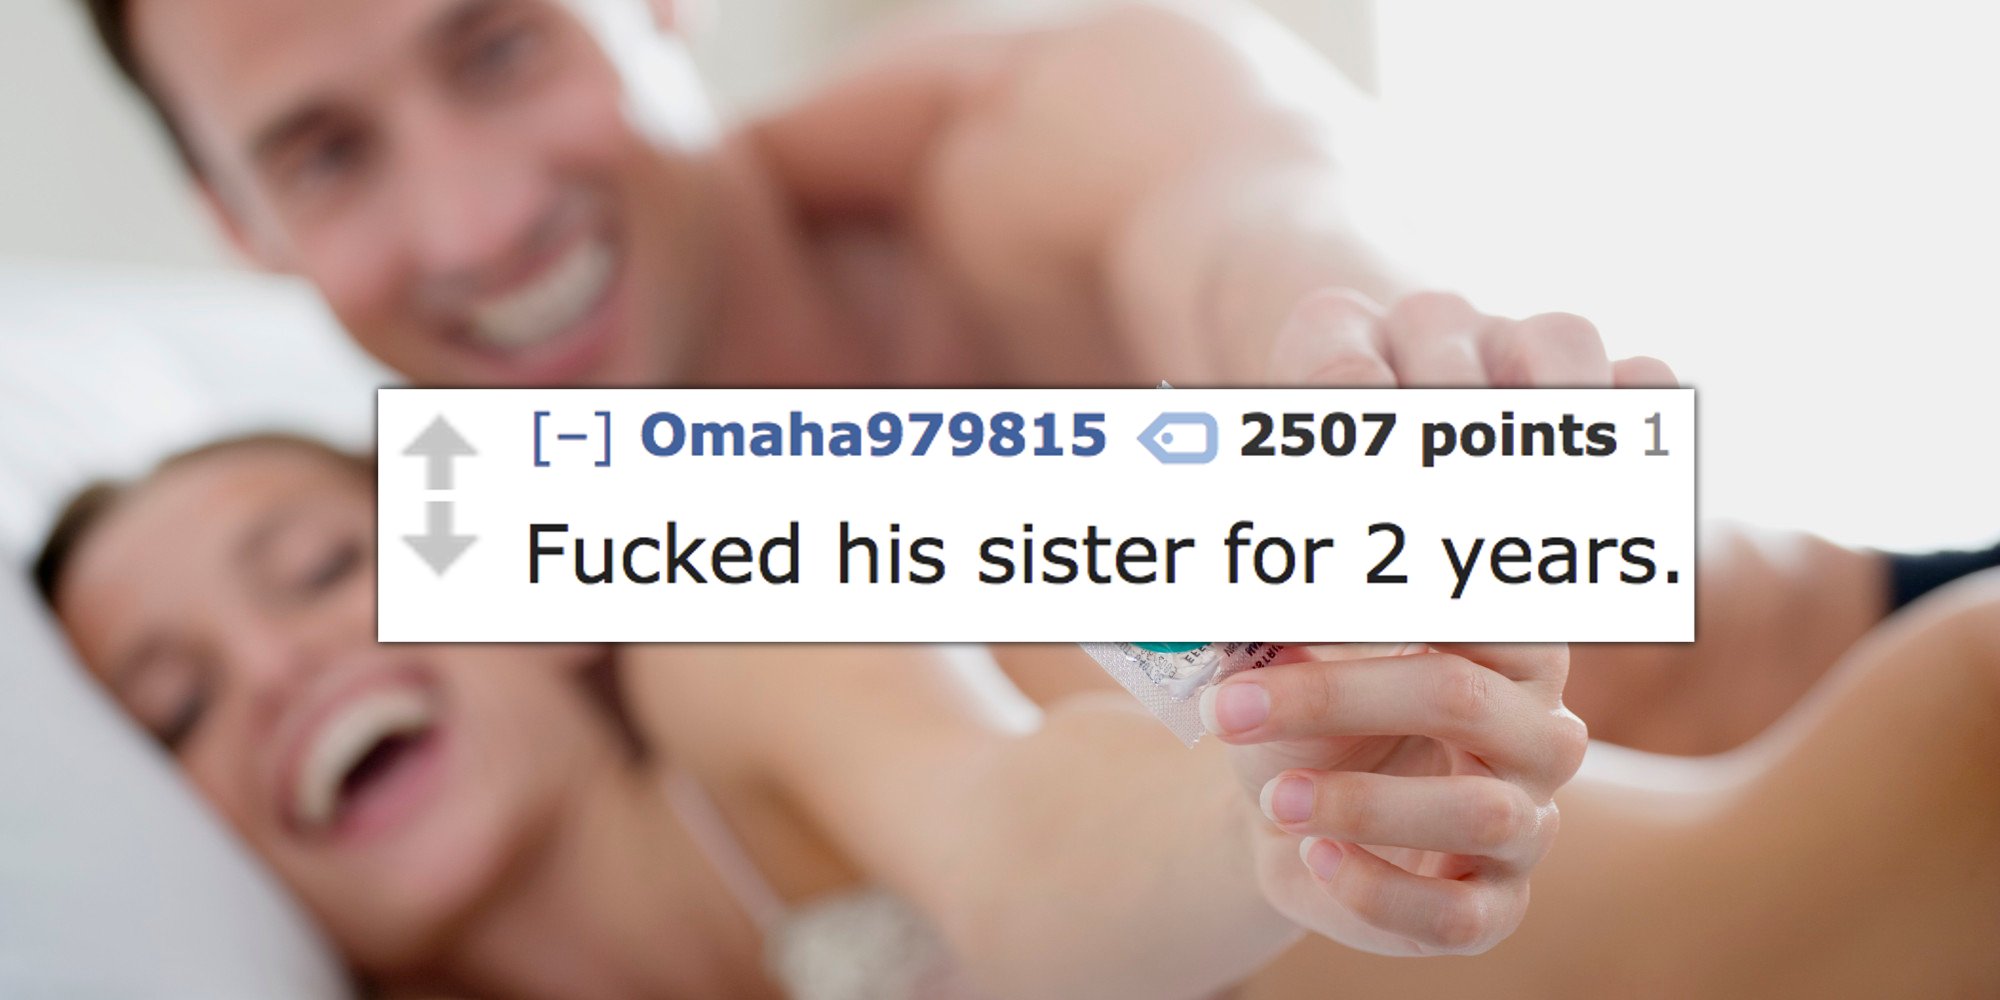 using condoms - 4 Omaha979815 2507 points 1 Fucked his sister for 2 years.